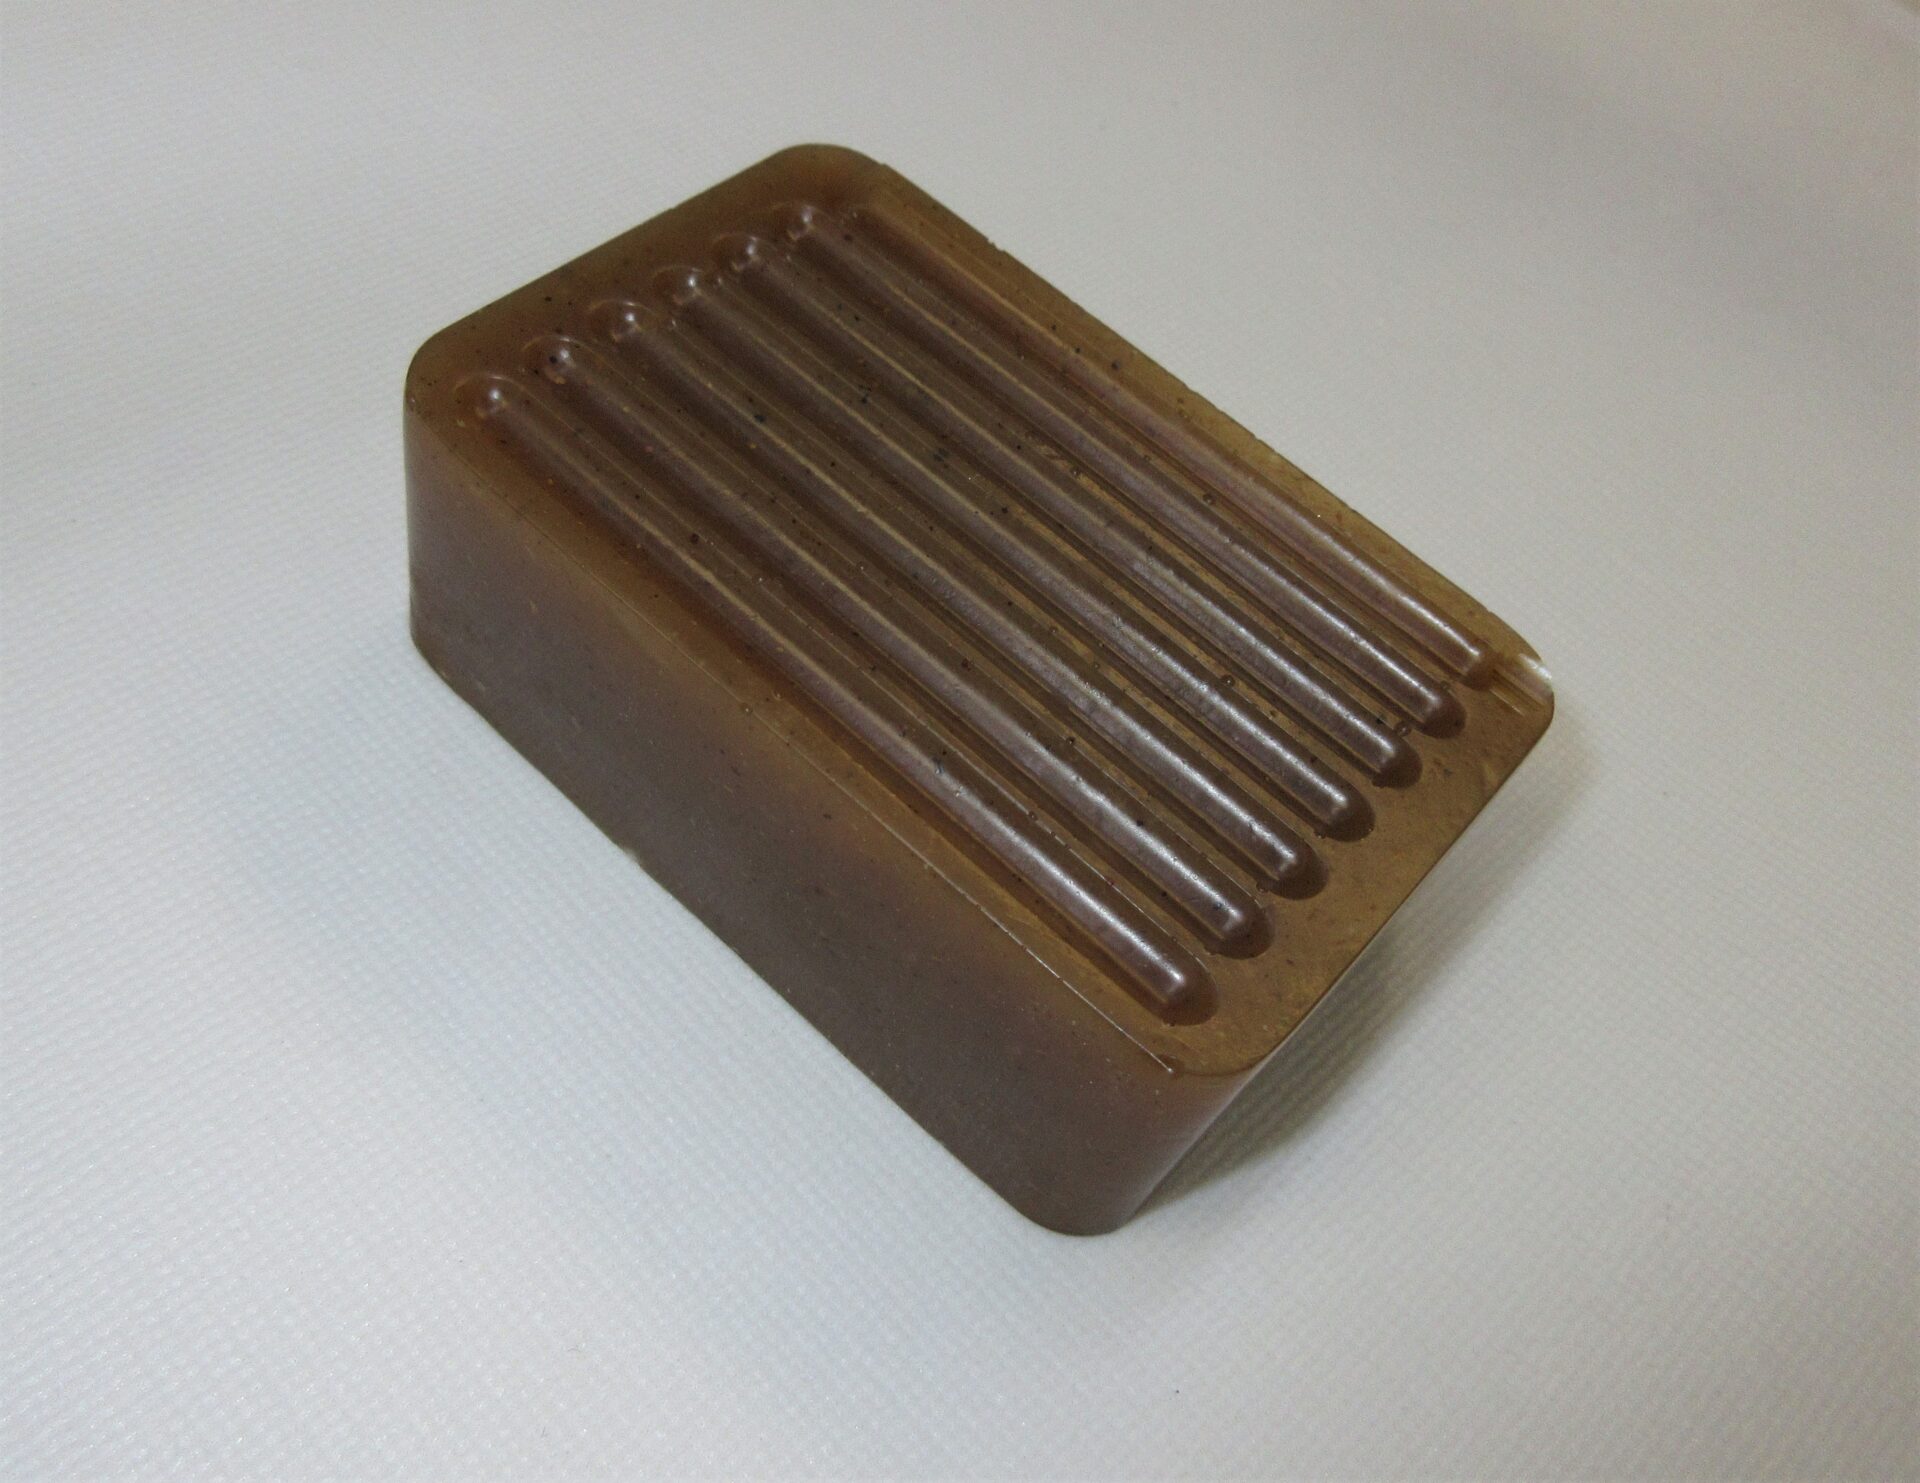 A brown soap bar sitting on top of a counter.